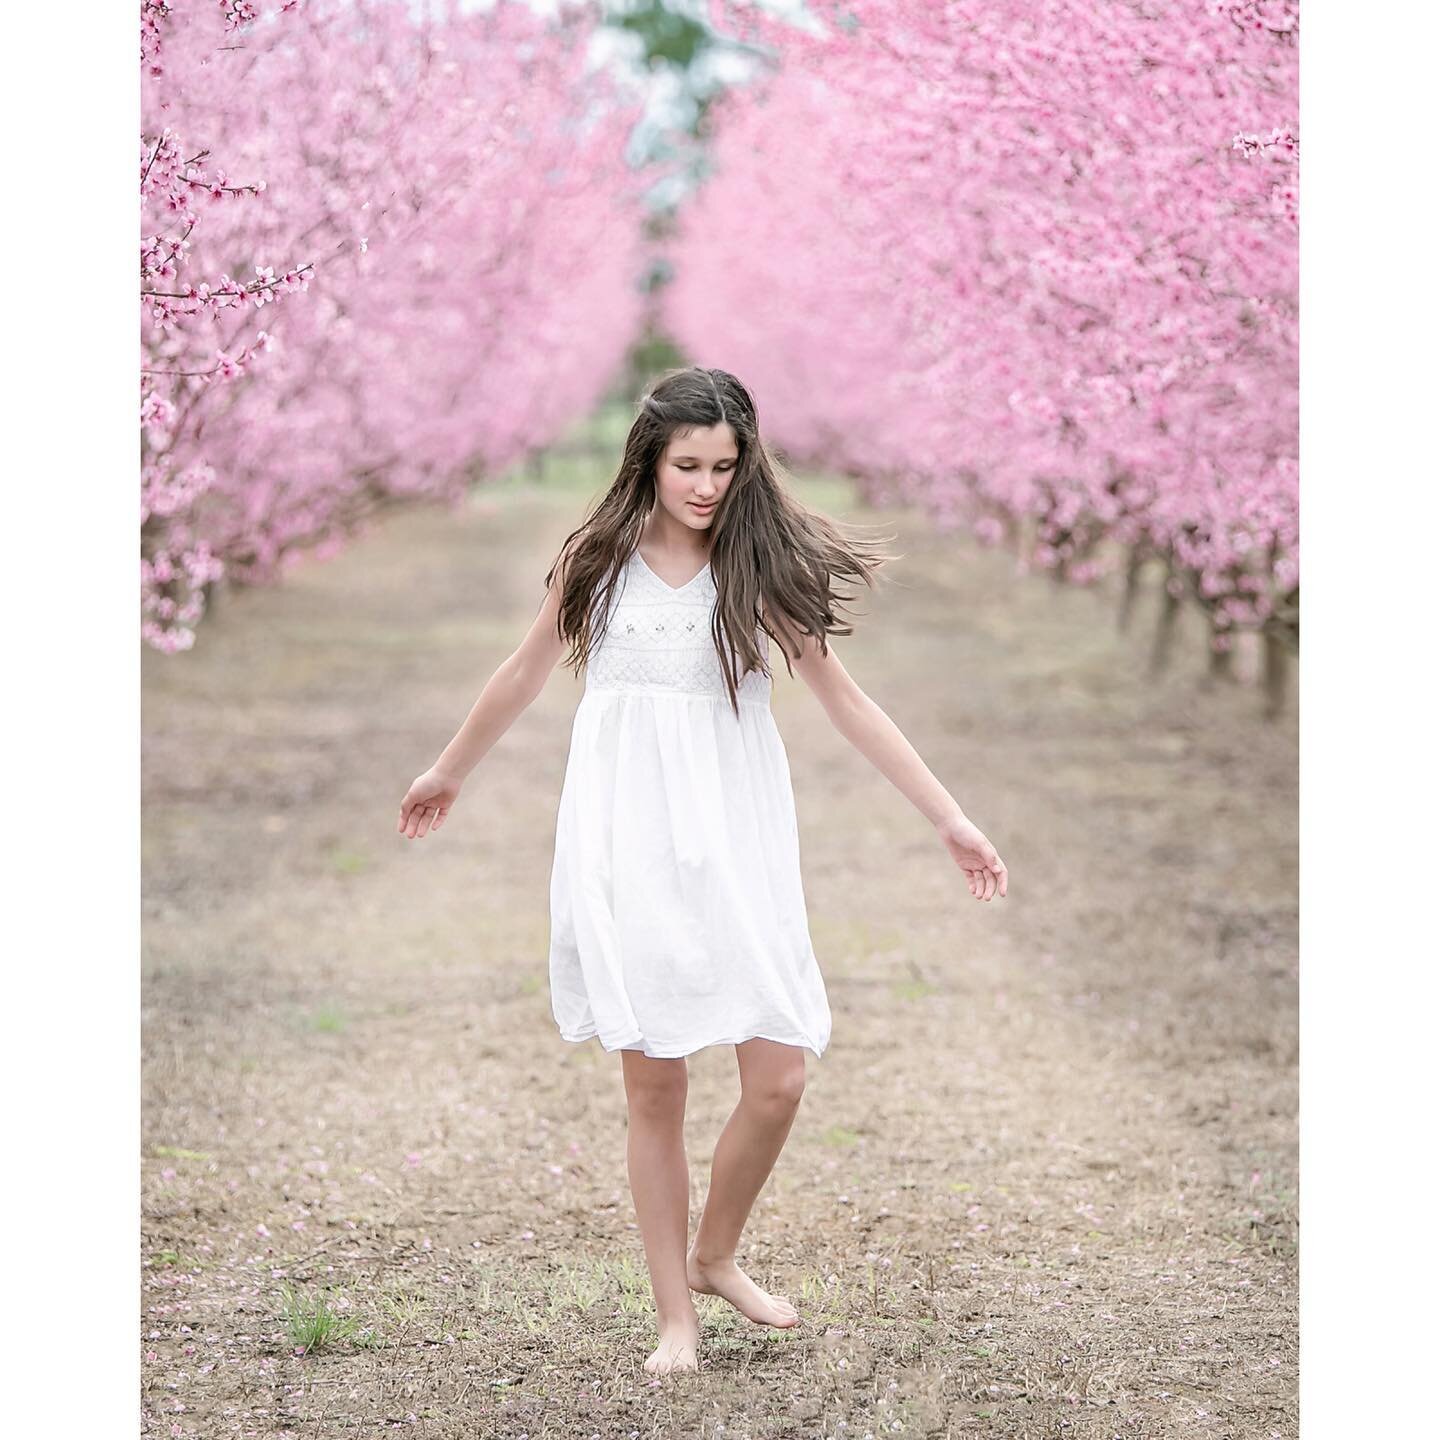 Dancing in a peach orchard amongst the blooms makes a beautiful portrait! Don&rsquo;t miss out - message me today for a Friday or Saturday session time this weekend! #peachblossoms #kimvinephotography #springportraits #tween #tweengirls